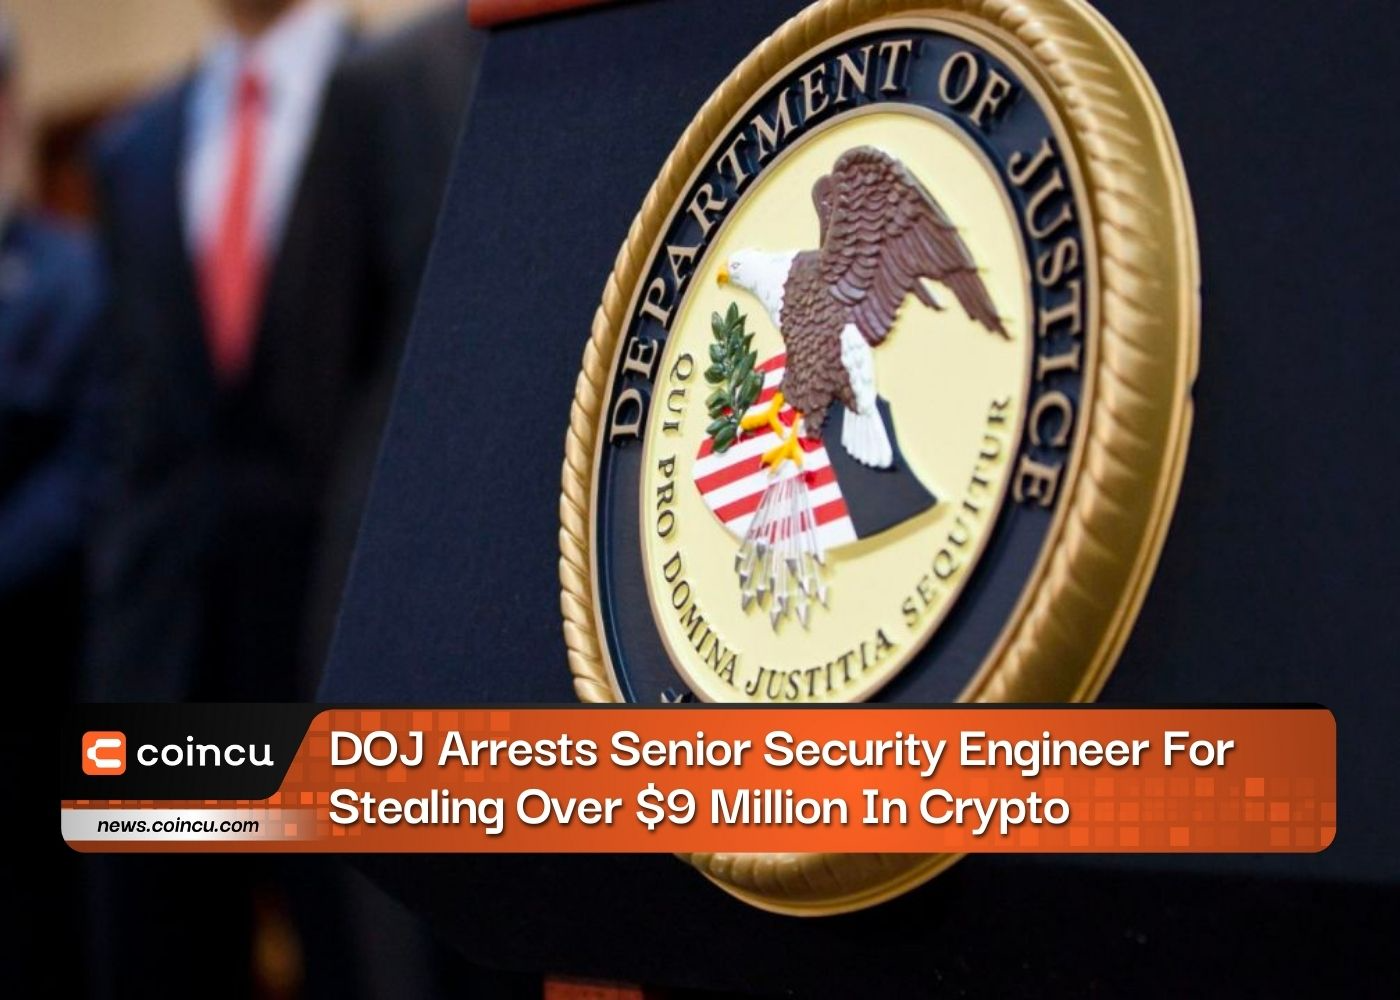 DOJ Arrests Senior Security Engineer For Stealing Over $9 Million In Crypto